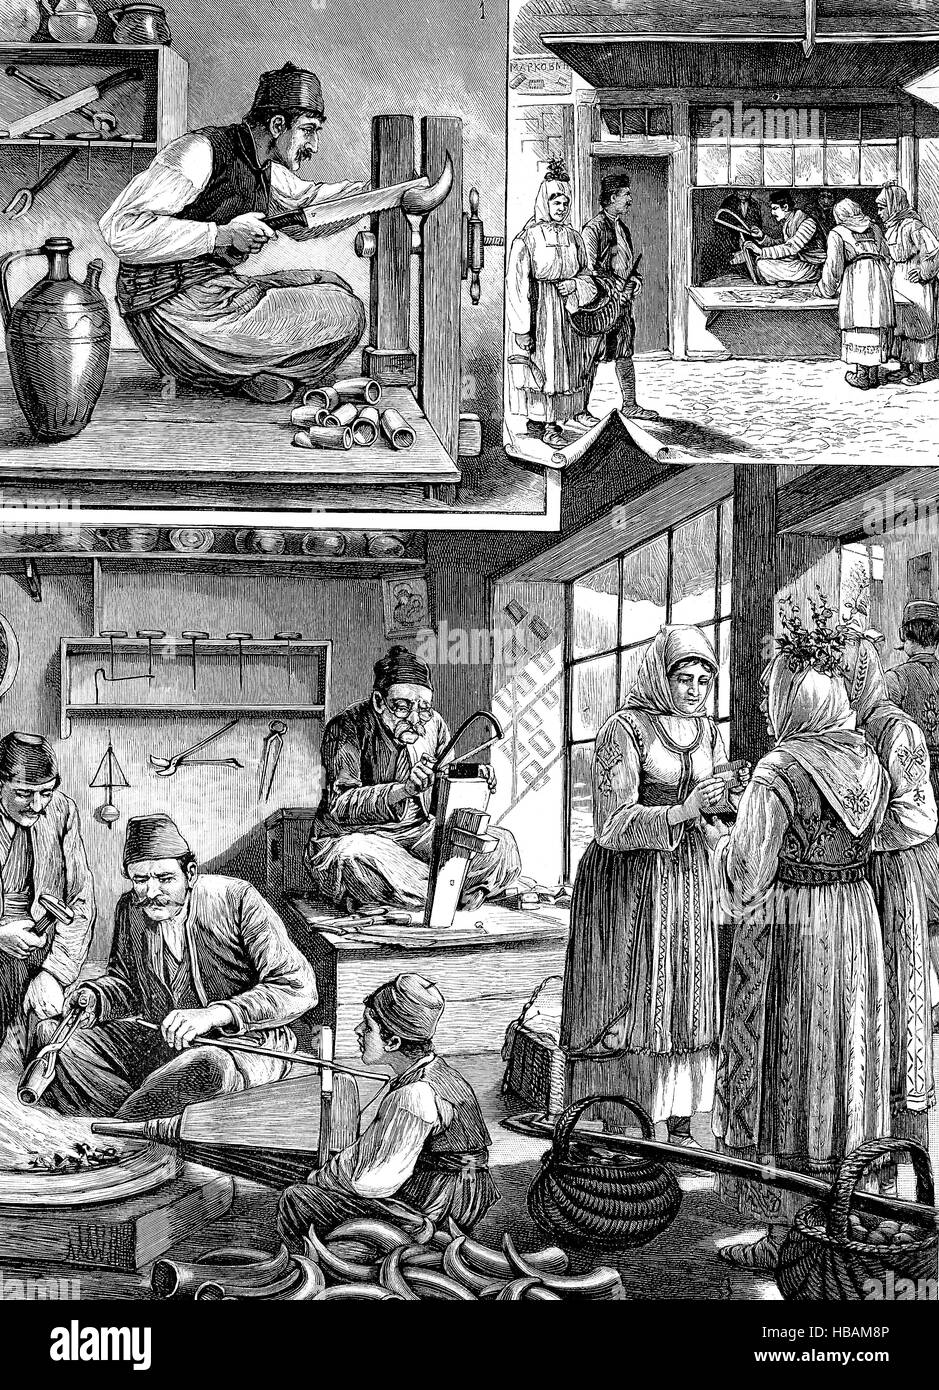 making combs, Comb maker workshop, here at Sofia, Bulgaria, hictorical illustration from 1880 Stock Photo